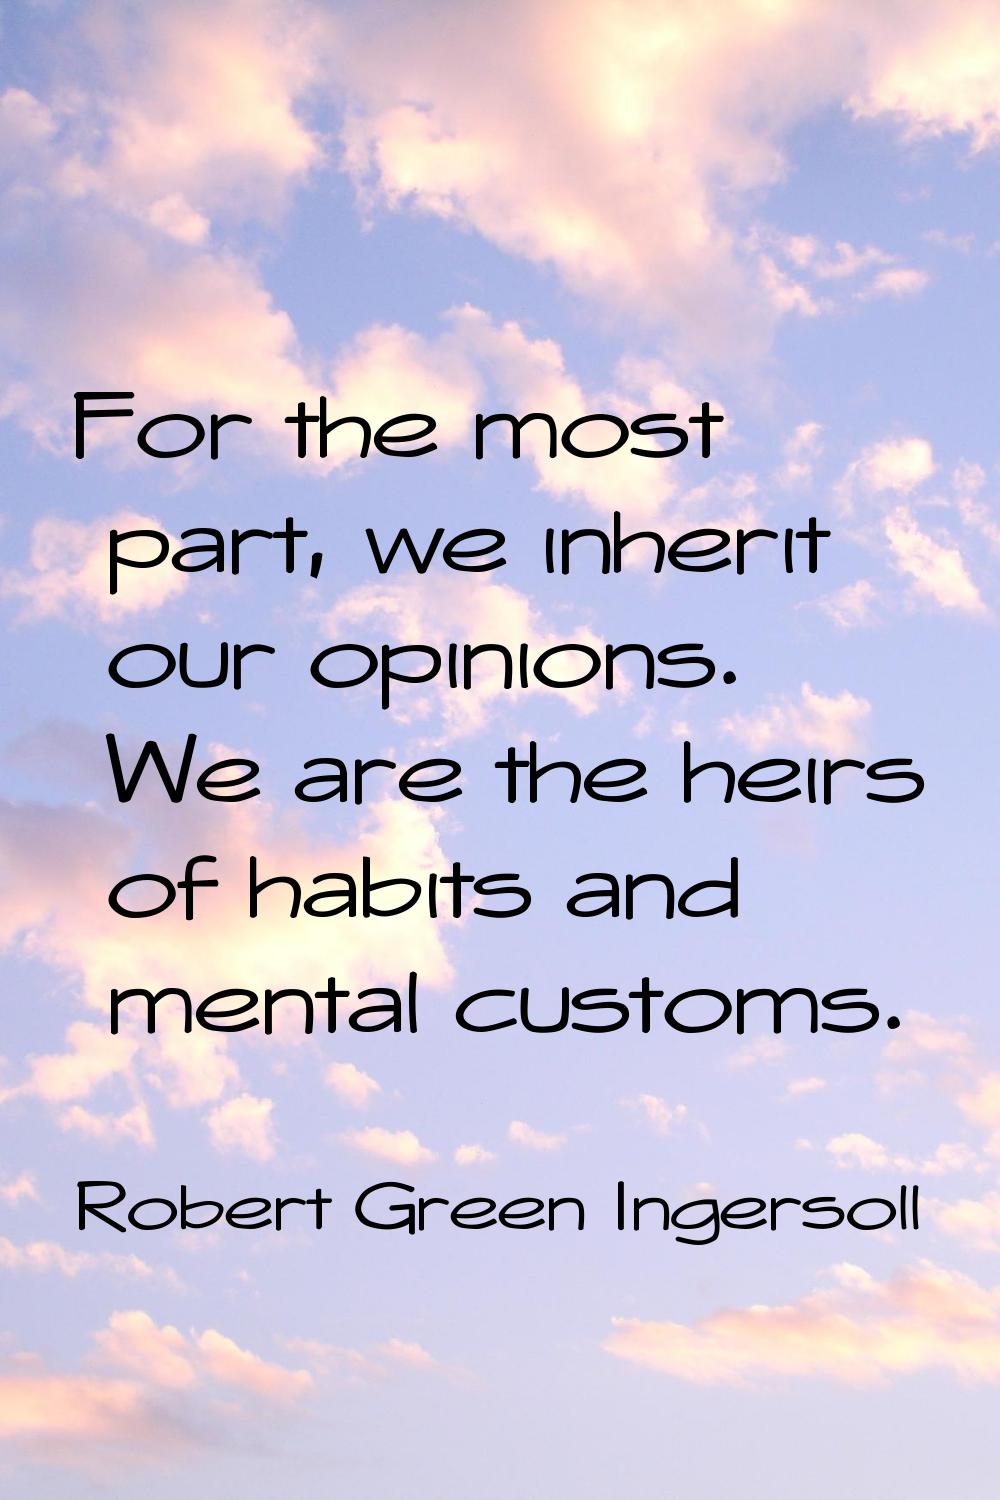 For the most part, we inherit our opinions. We are the heirs of habits and mental customs.